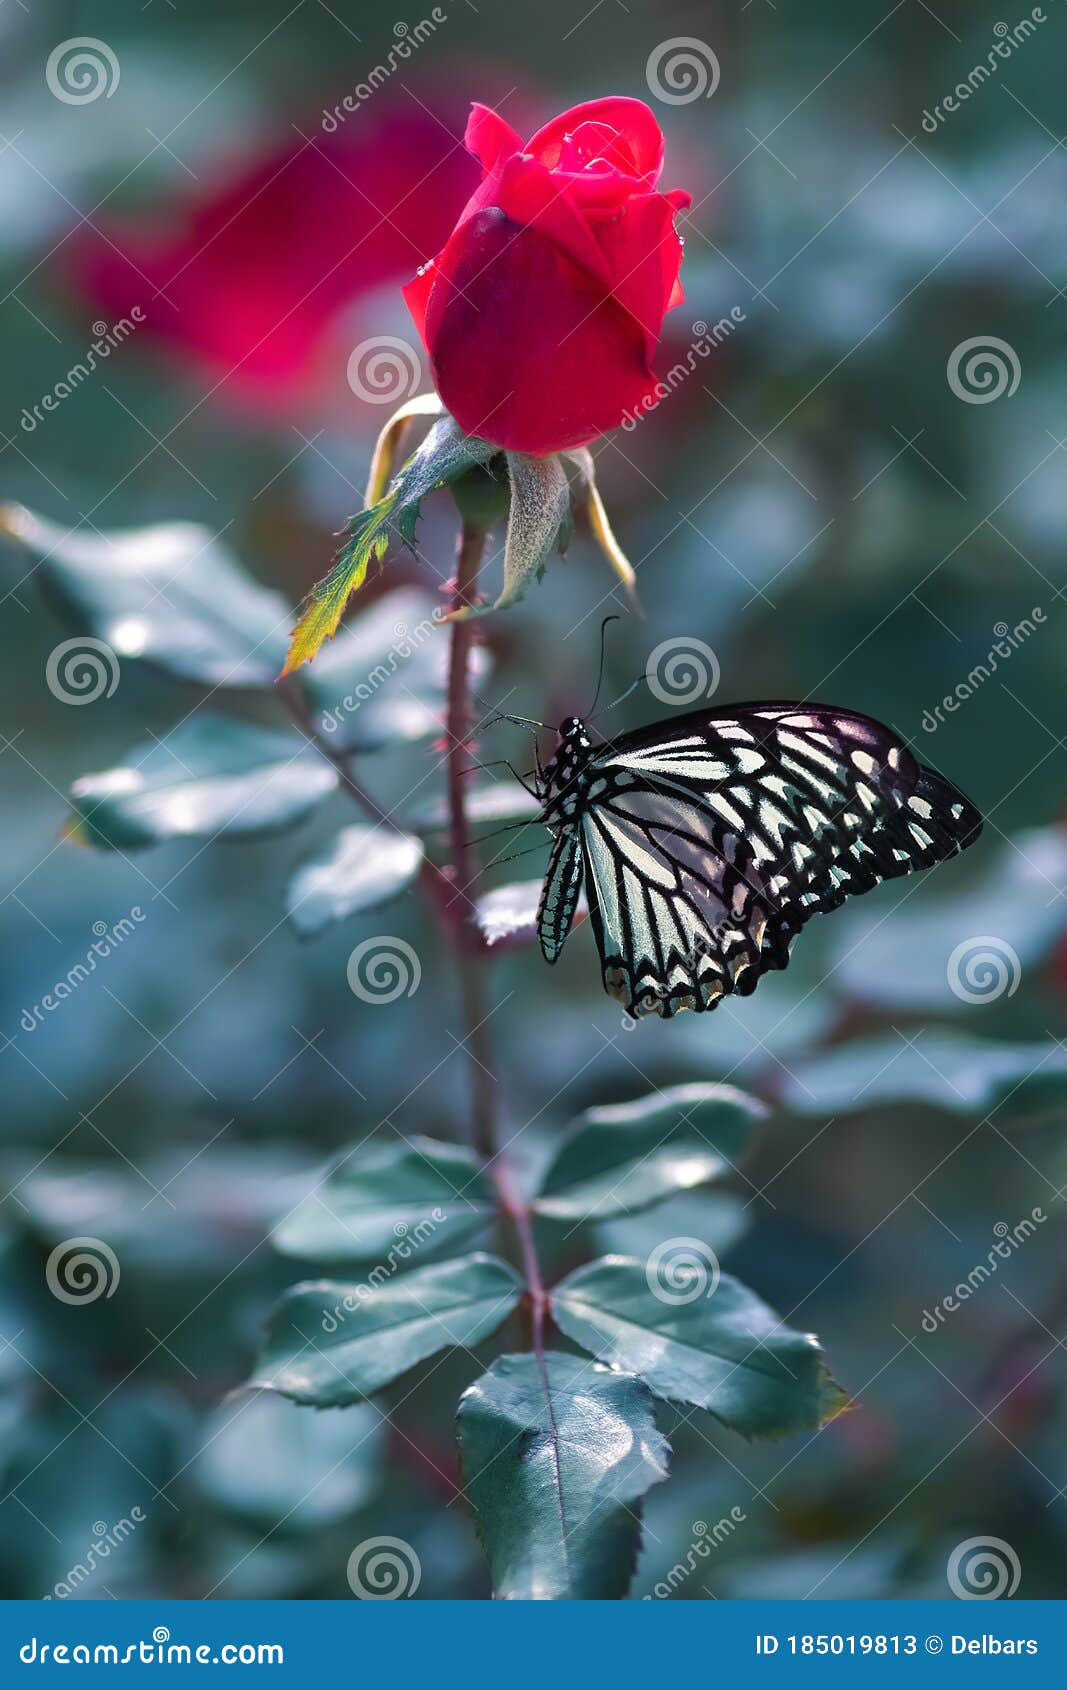 4,489 Red Rose Butterfly Stock Photos - Free & Royalty-Free Stock Photos  from Dreamstime